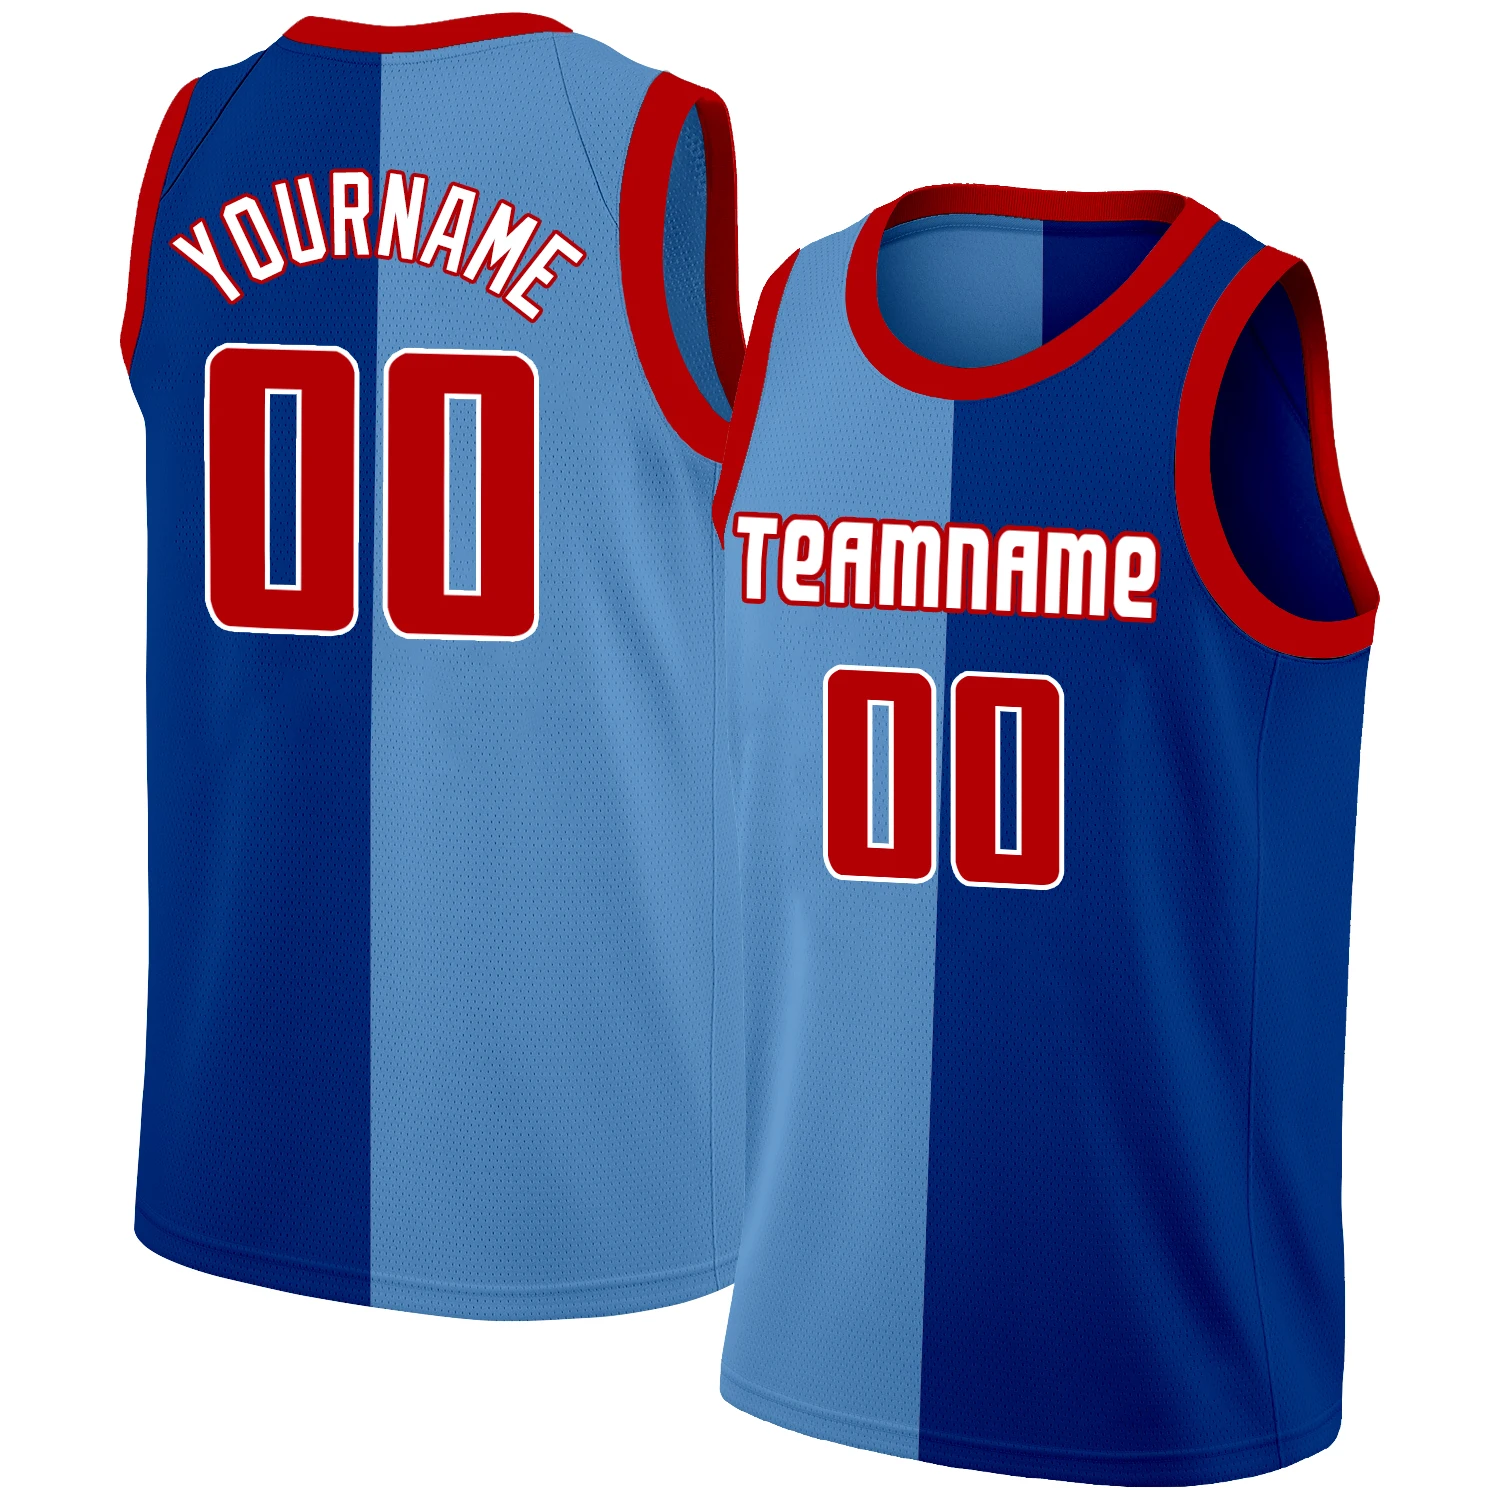 

Fashion Unique Basketabll Jersey Custom Printed Team Name/Number Sleeveless Breathable Round-Neck Shirt Tank Top for Playing Men